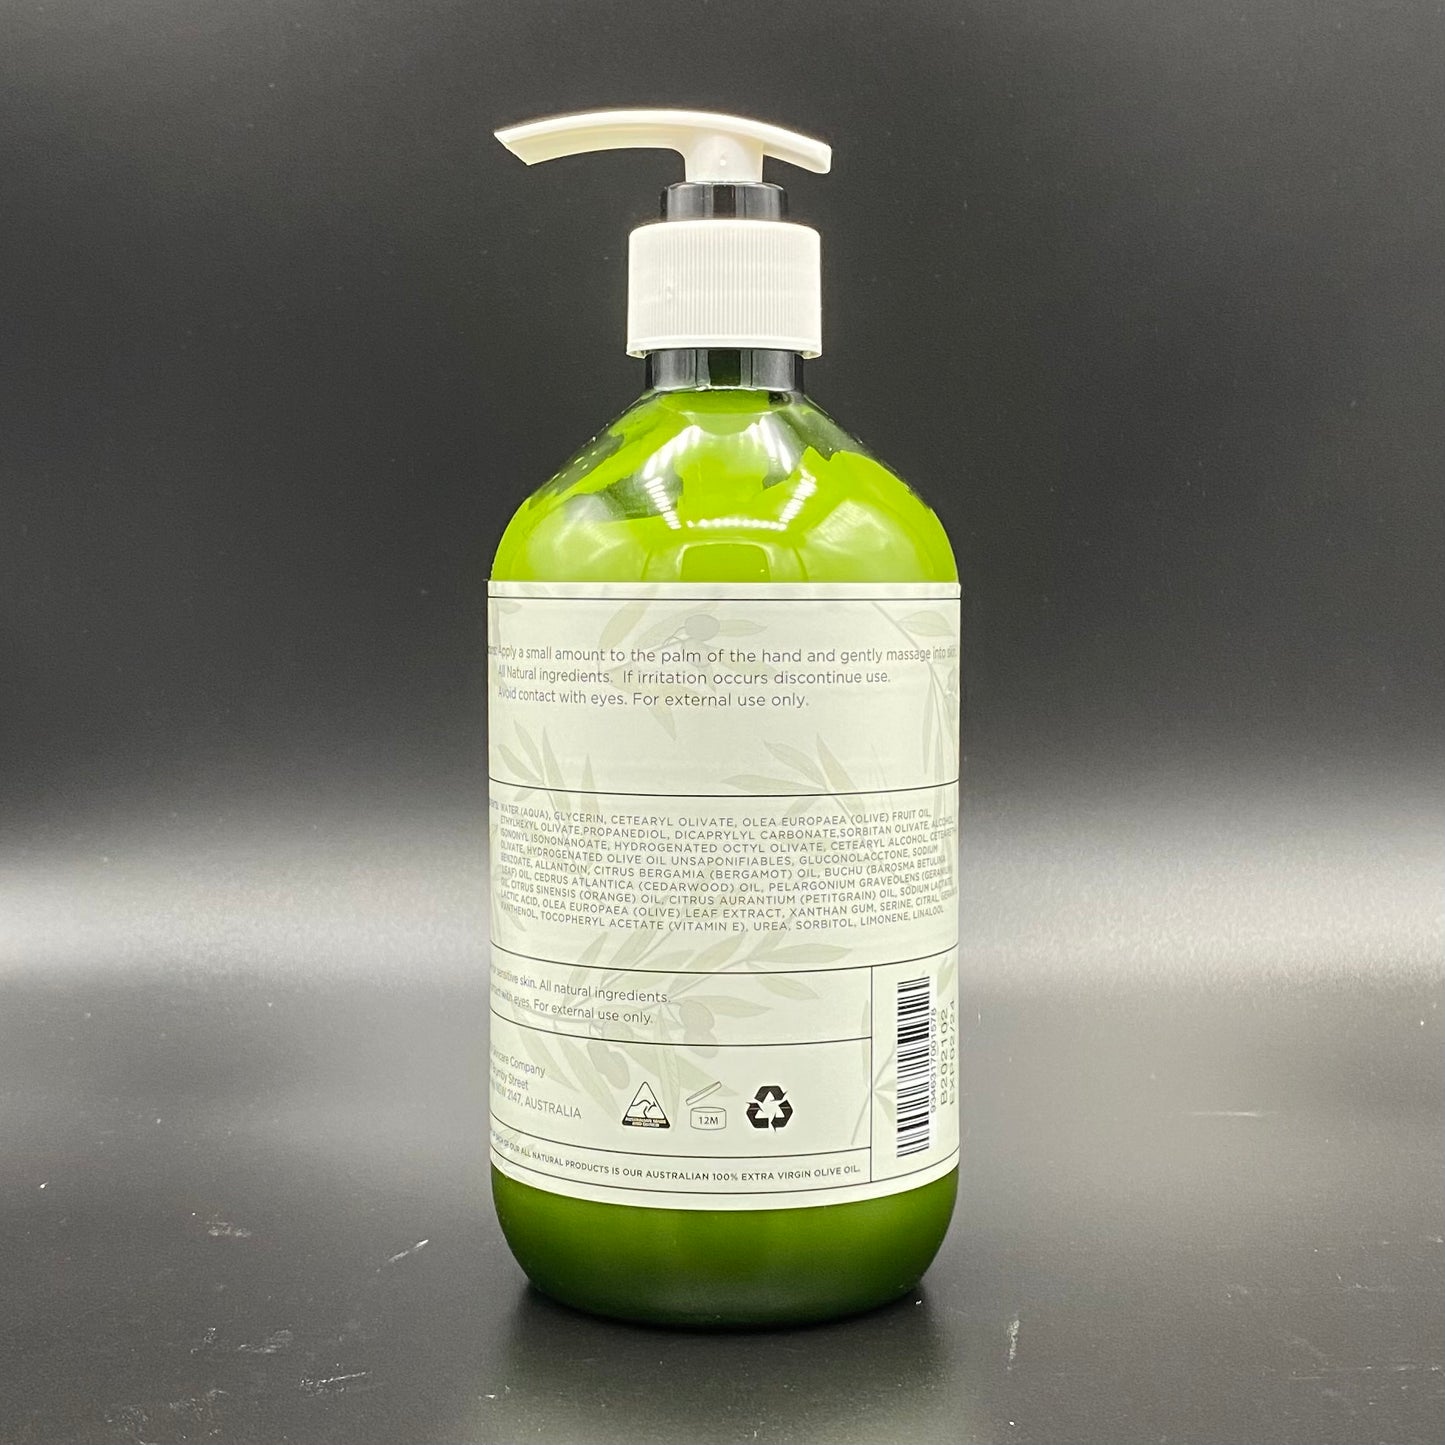 Naturally Nourished Soothing Hand & Body Lotion